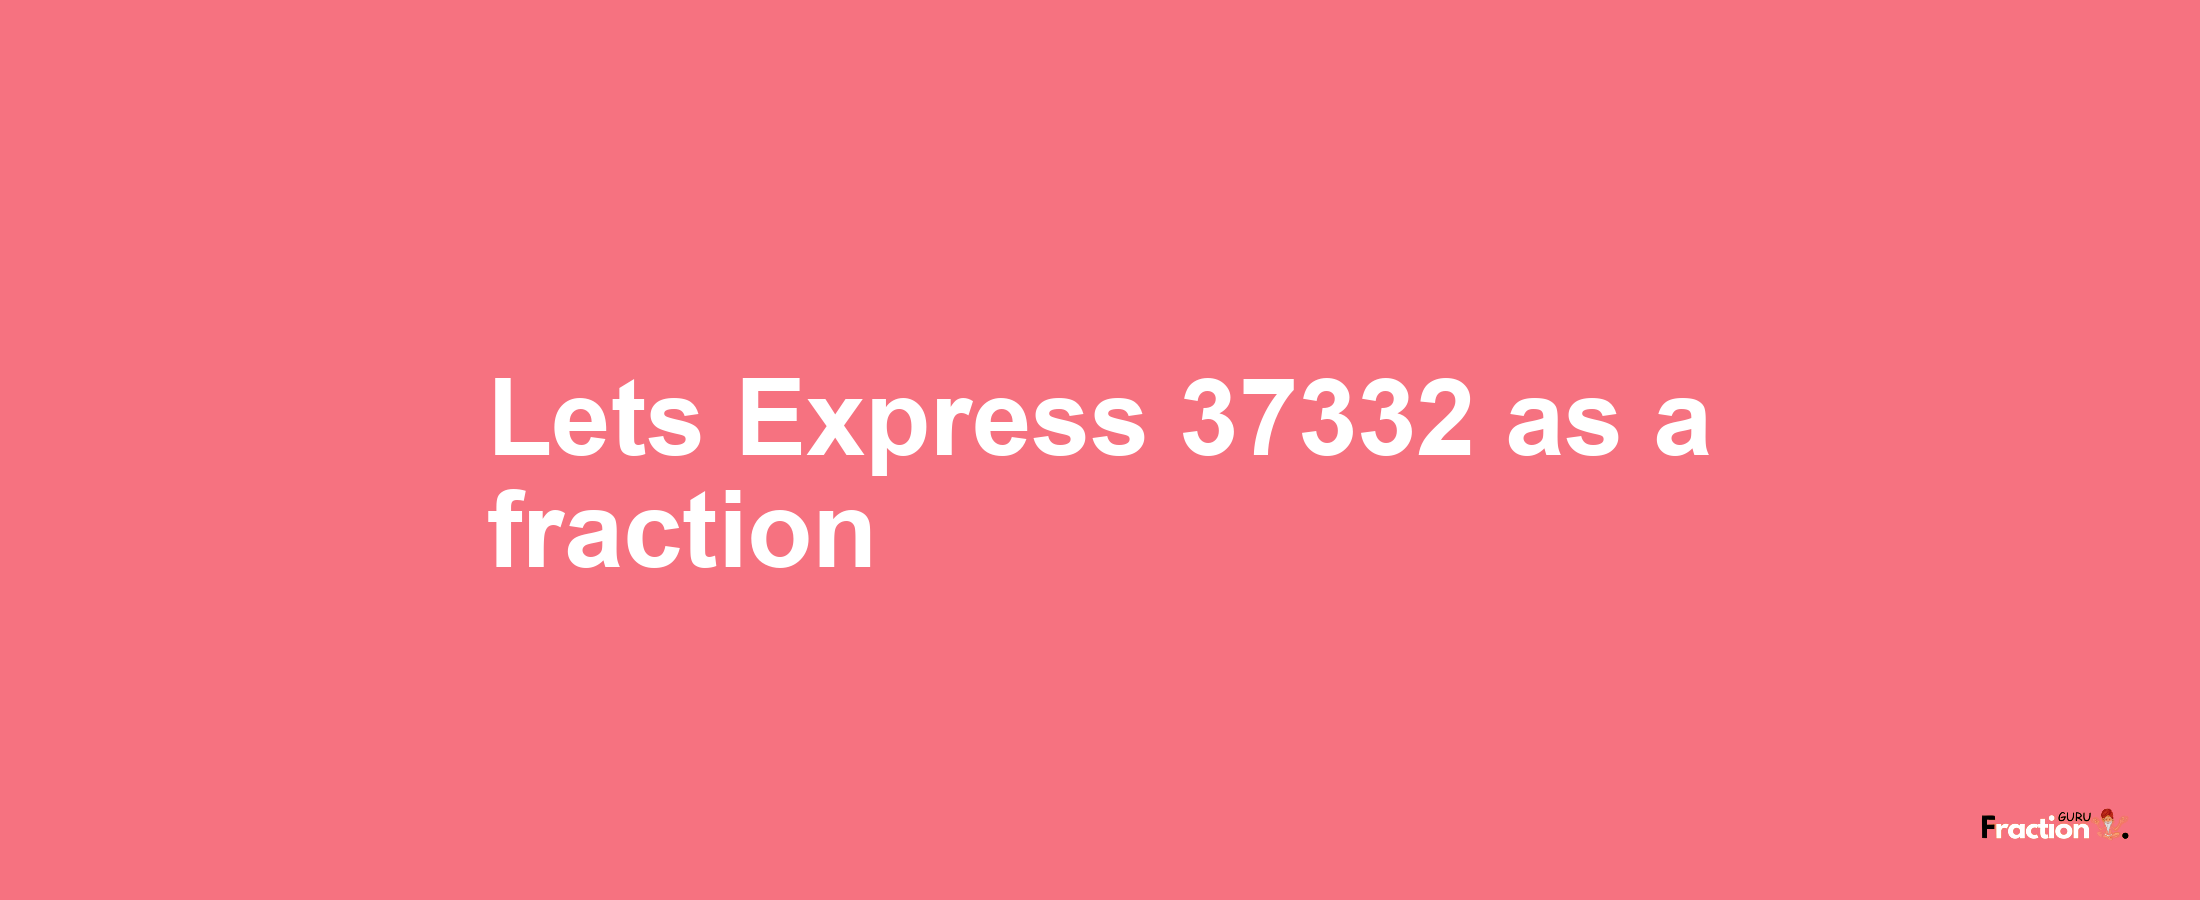 Lets Express 37332 as afraction